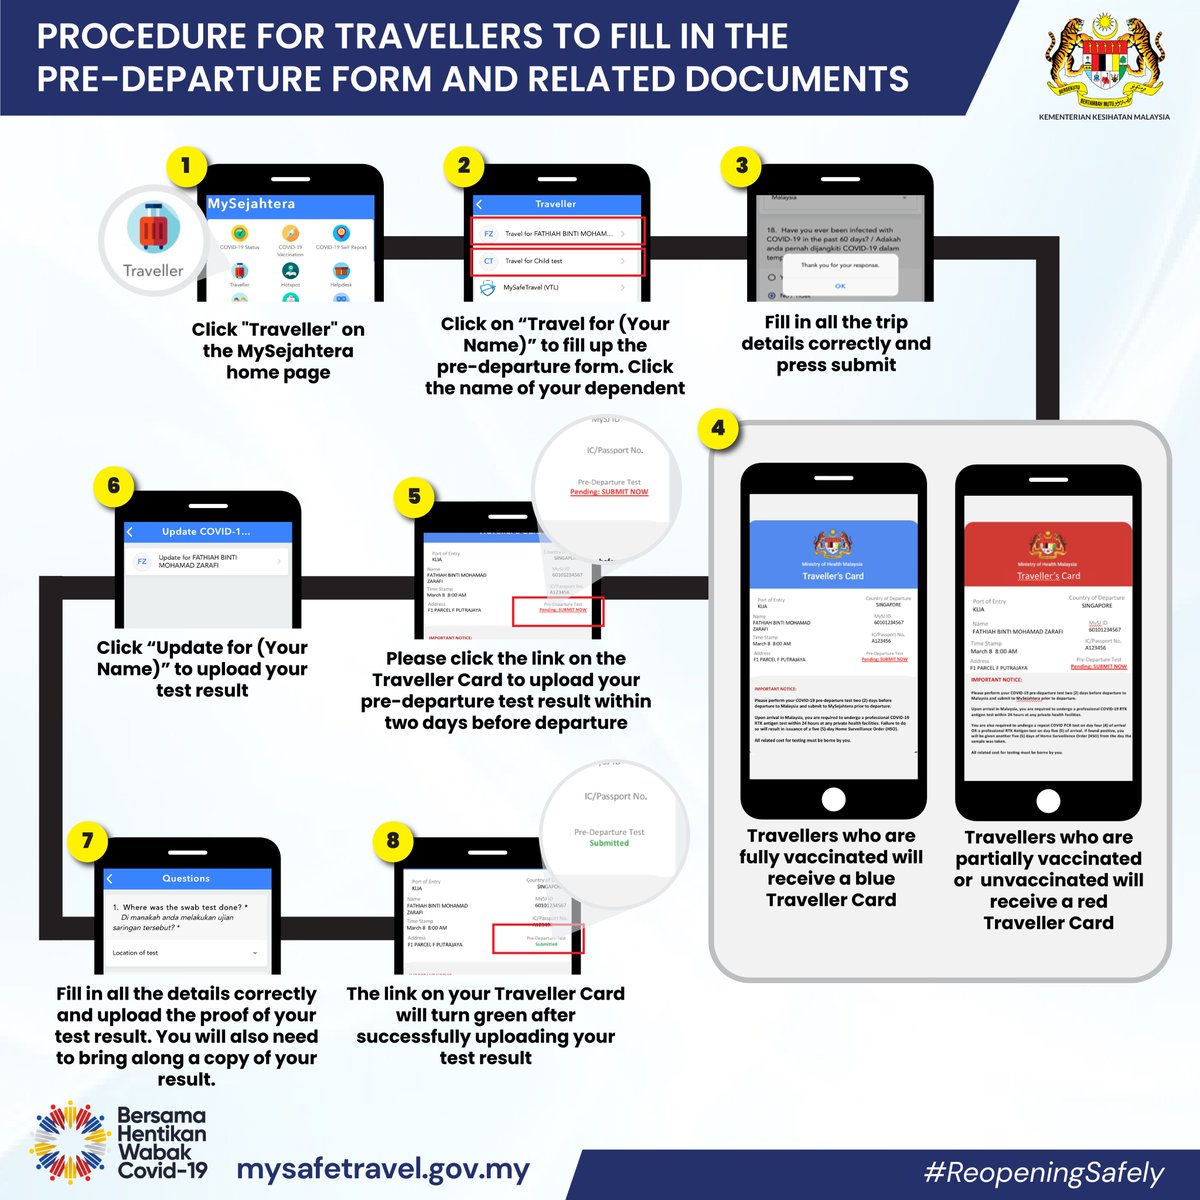 All travellers entering 🇲🇾 are required to fill in the pre-departure form in the MySejahtera application. The pre-departure test result also has to be uploaded within 2 days before departure. 

Fill in the pre-departure form and related documents. #ReopeningSafely